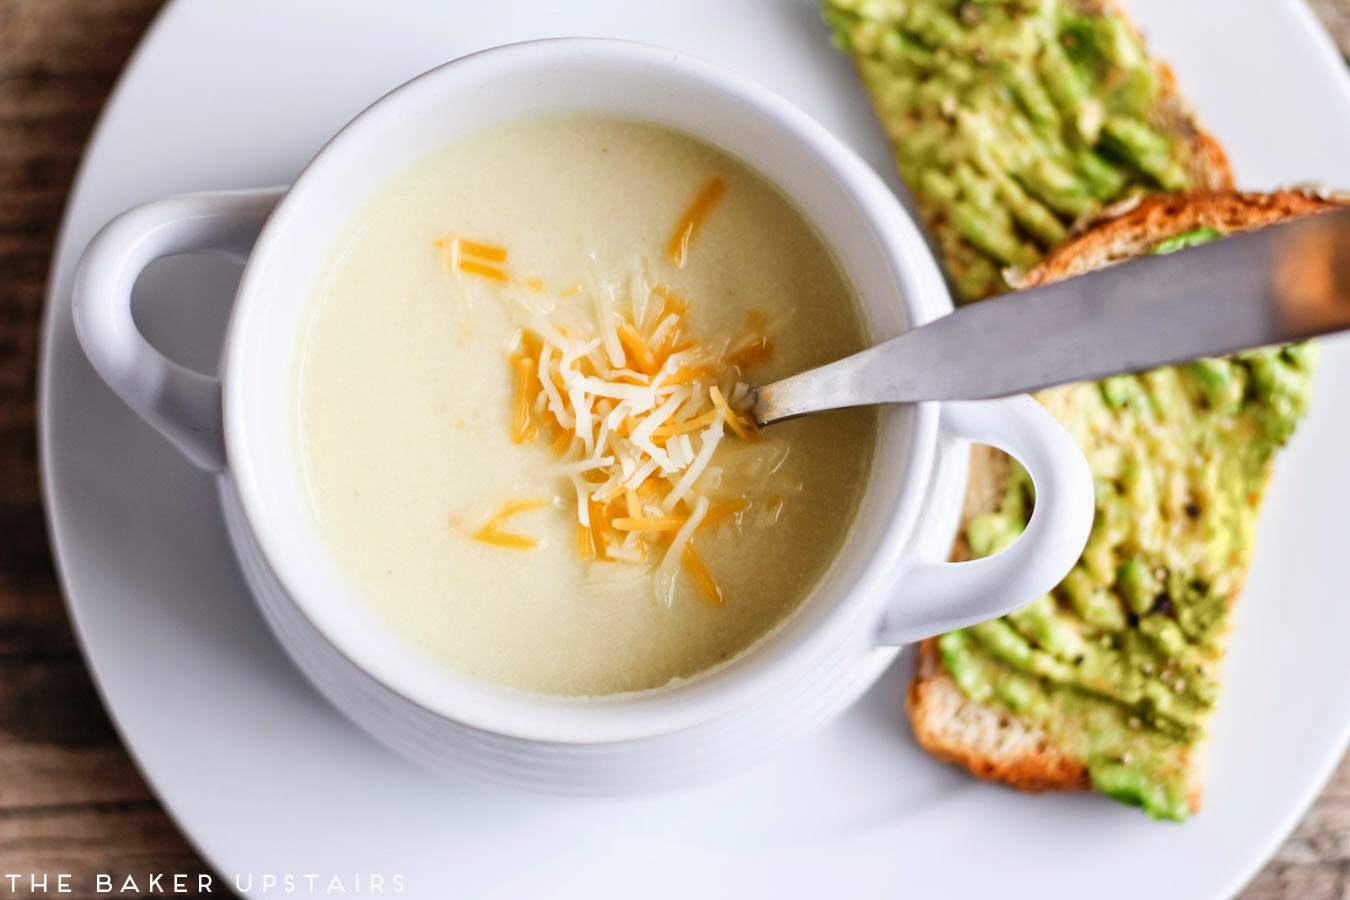 Creamy, smooth, and delicious cheesy cauliflower soup. So delicious and so easy to make!